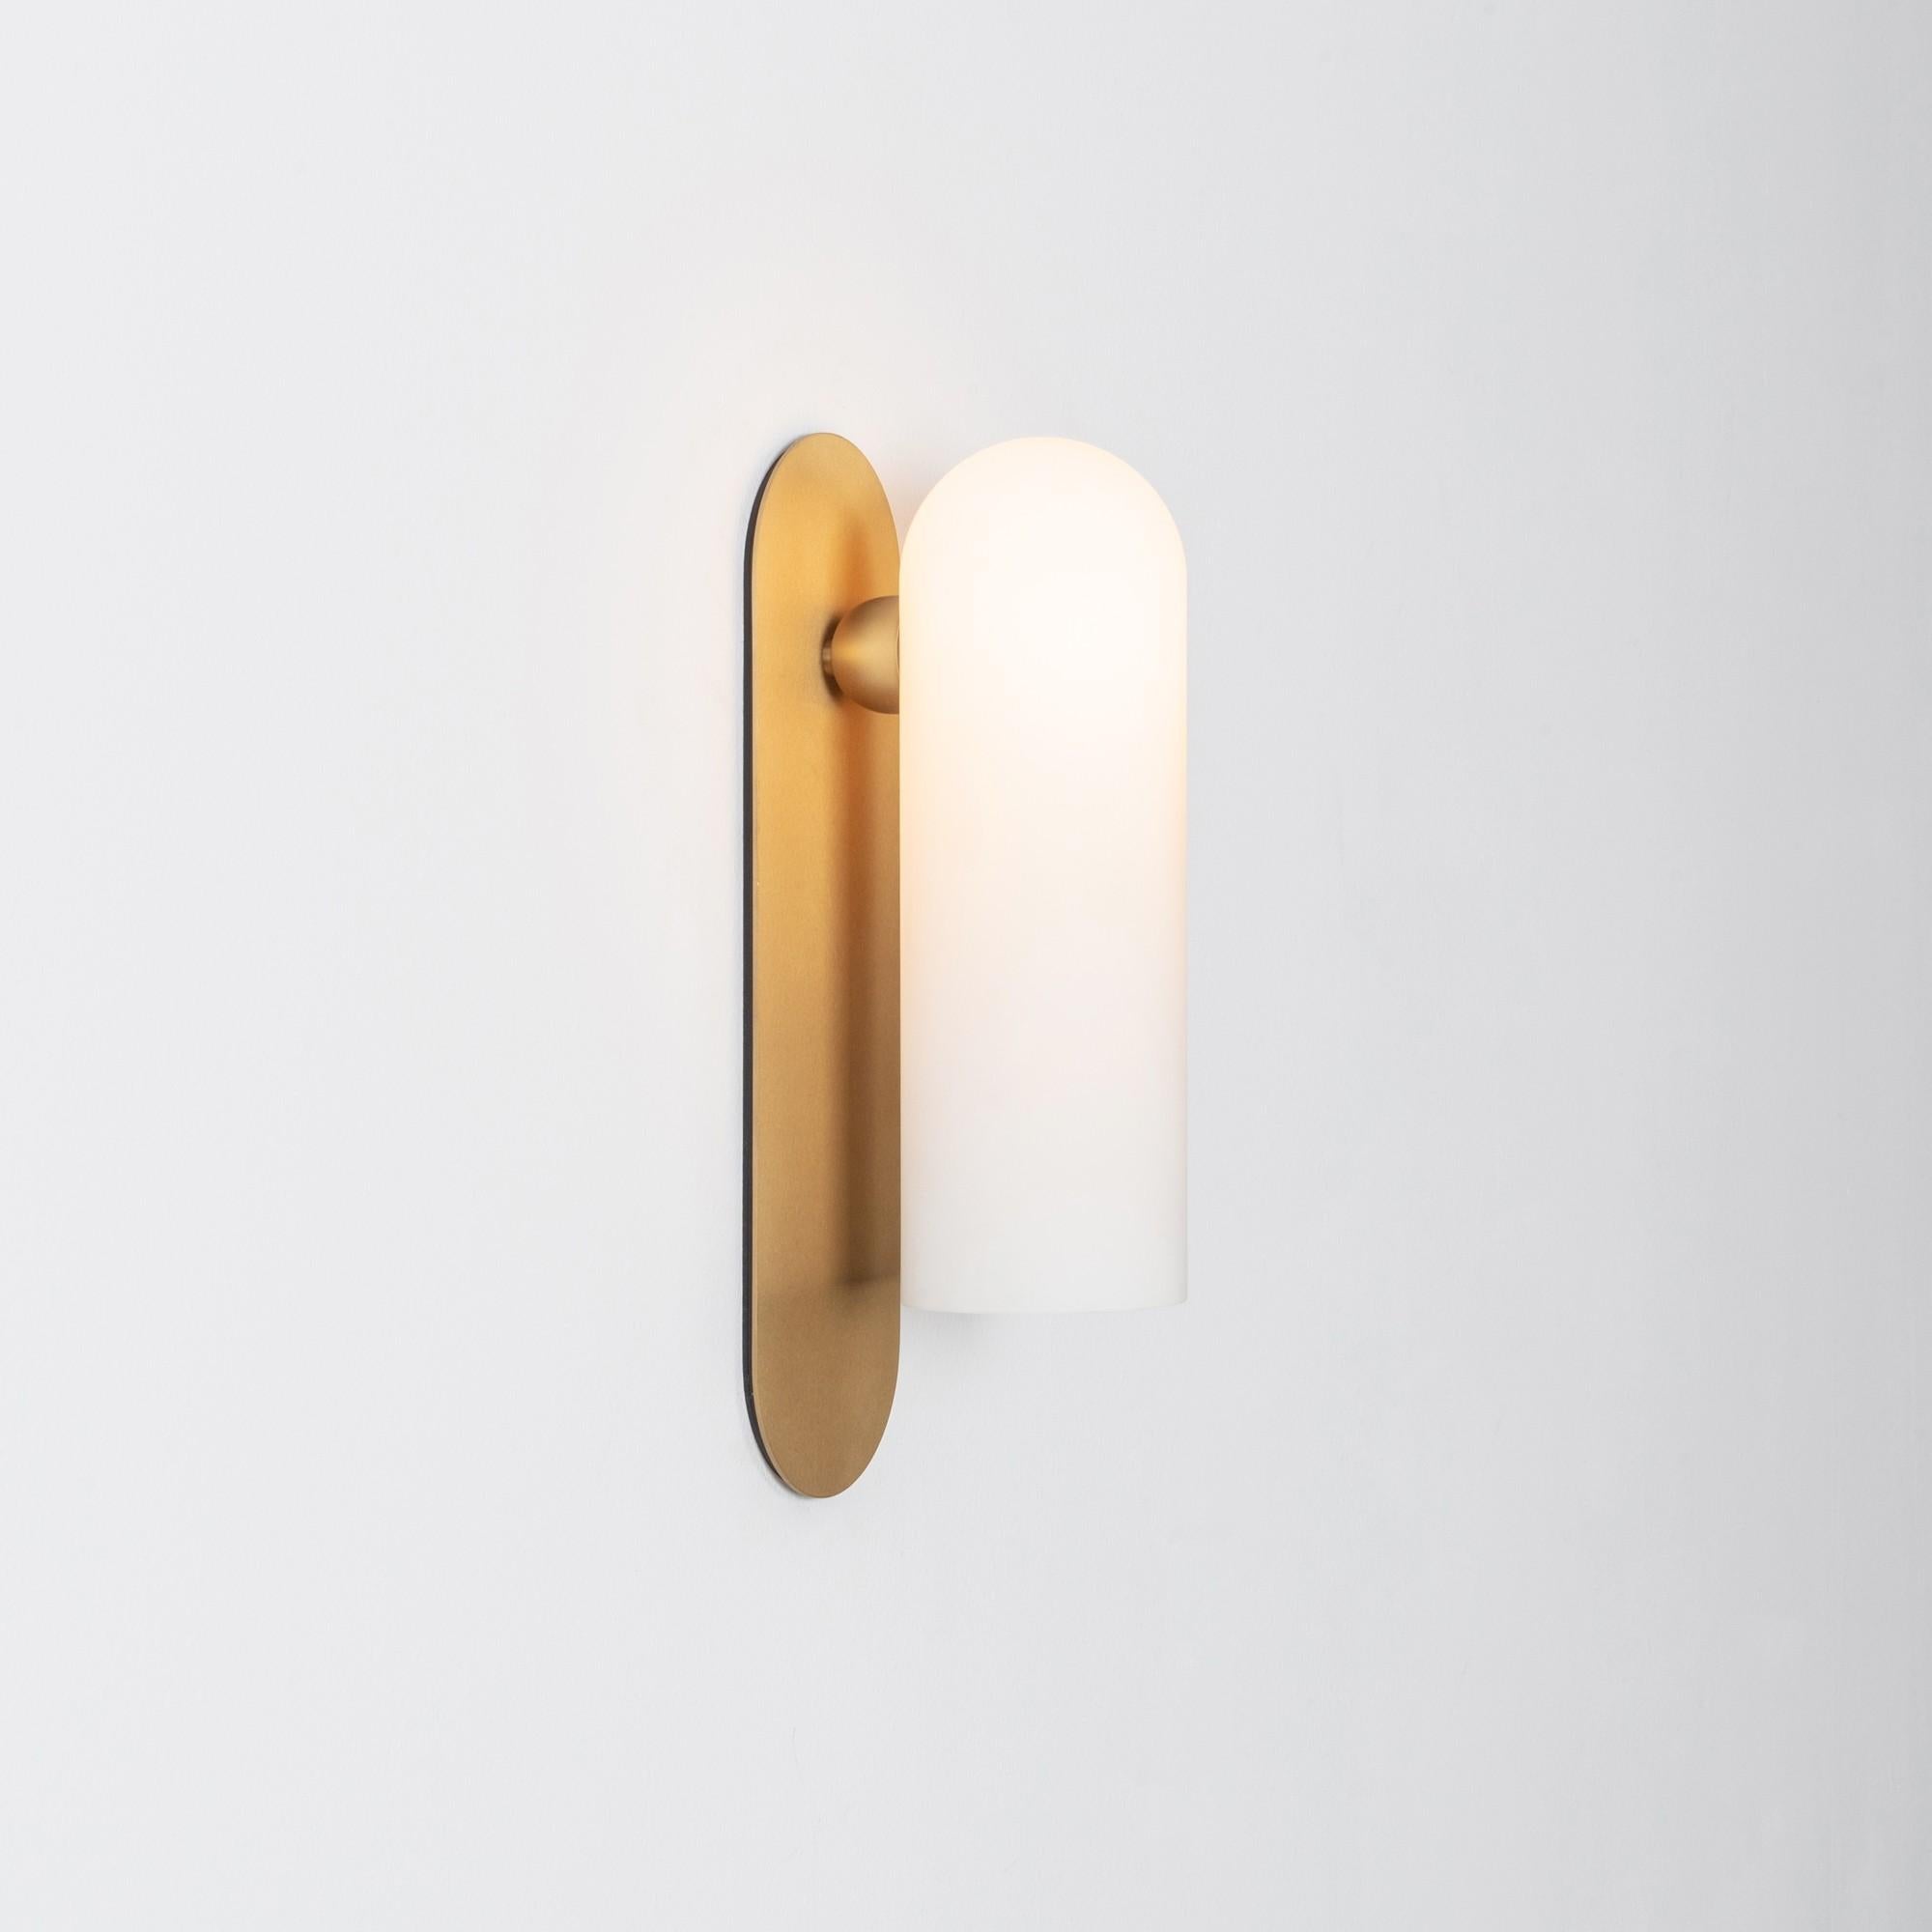 Odyssey LG Sconce by Schwung
Dimensions: W 10.5 x D 14 x H 38 cm
Materials: Brass, frosted glass

Finishes available: Black gunmetal, polished nickel, brass

Schwung is a German word, and loosely defined, means energy or momentumm of a positive